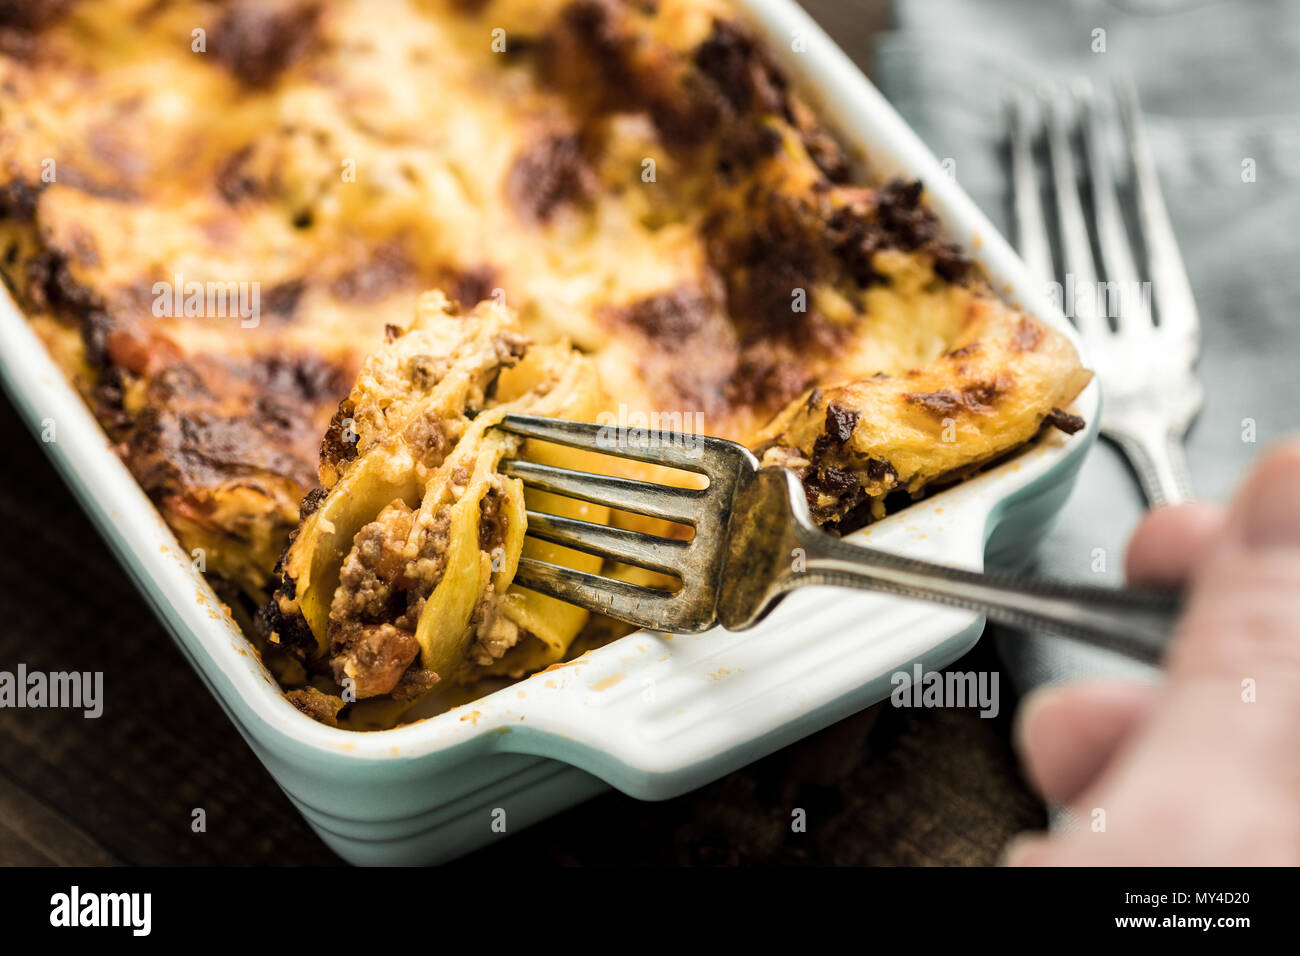 Eating Italian Lasagna with Fork on Dark Wooden Background Stock Photo